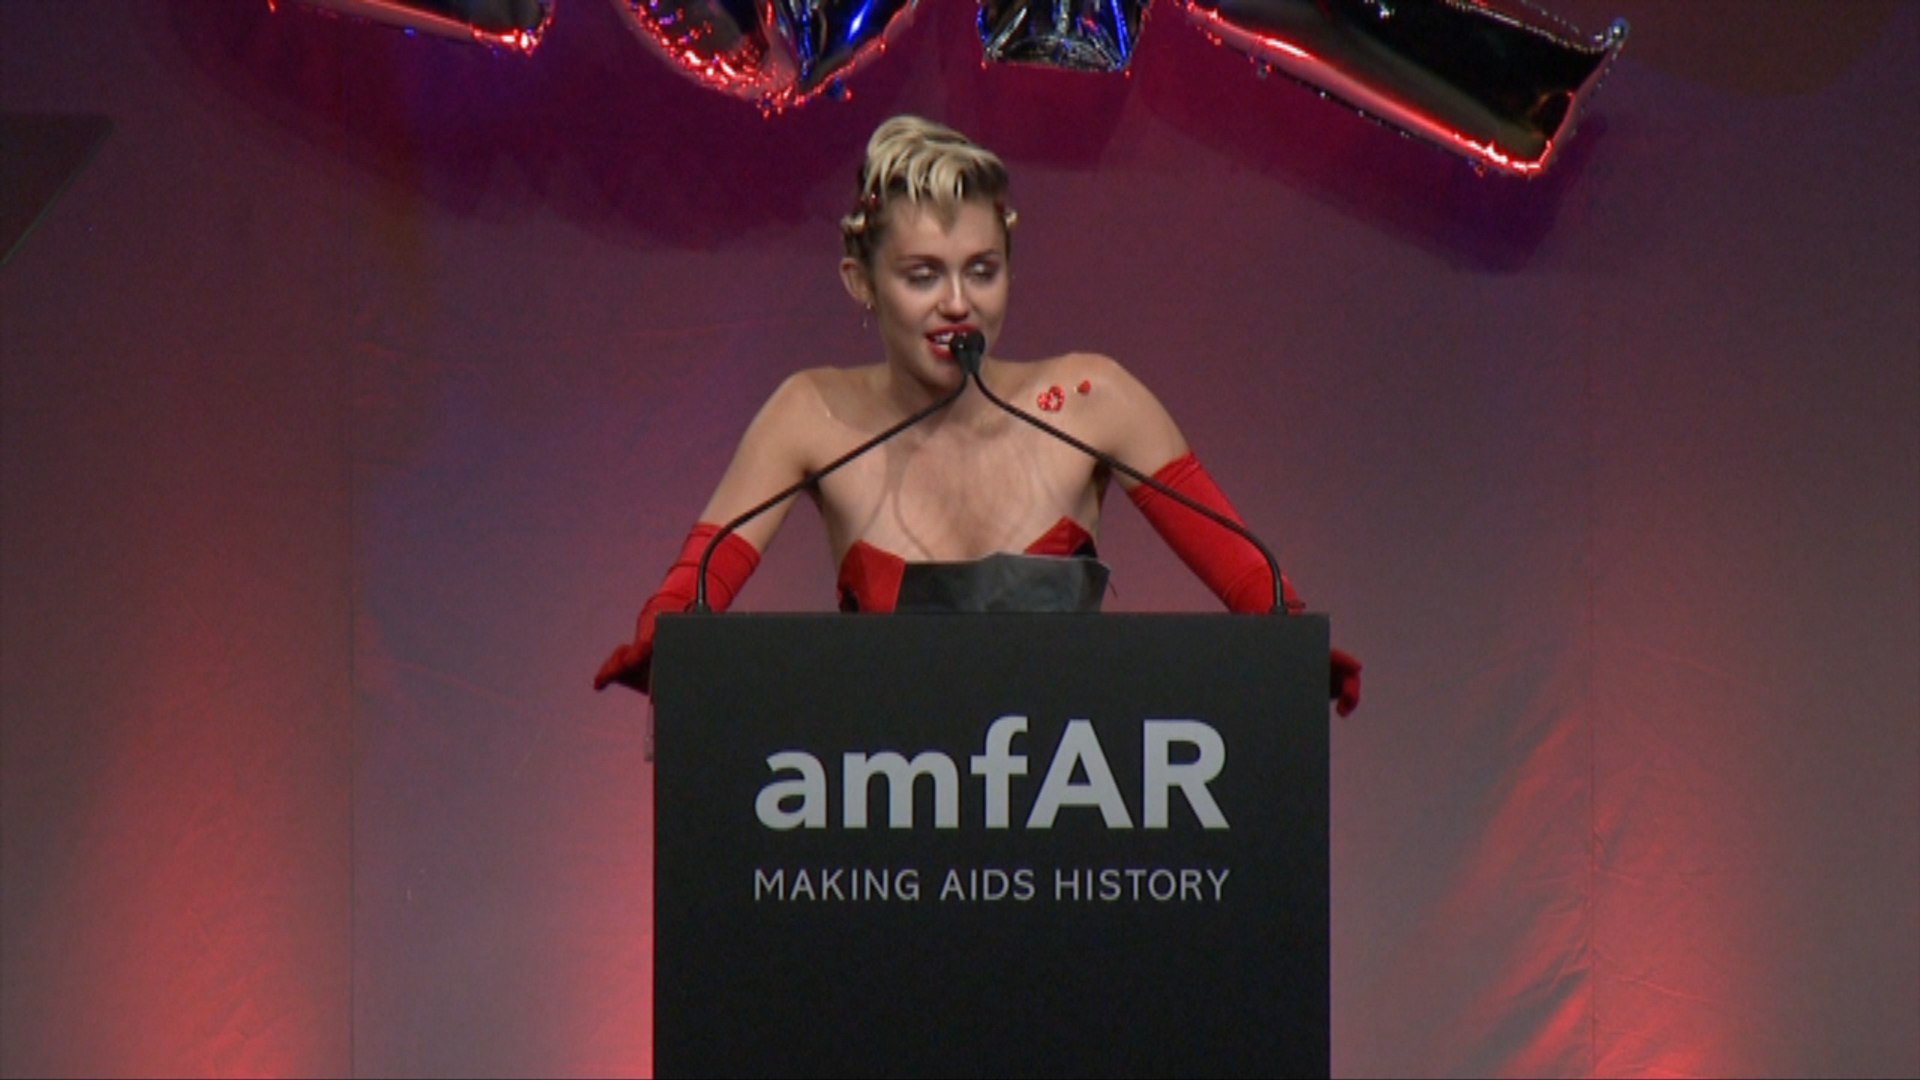 Miley Cyrus Honored In Very Sexy Red Dress At amfAR Gala